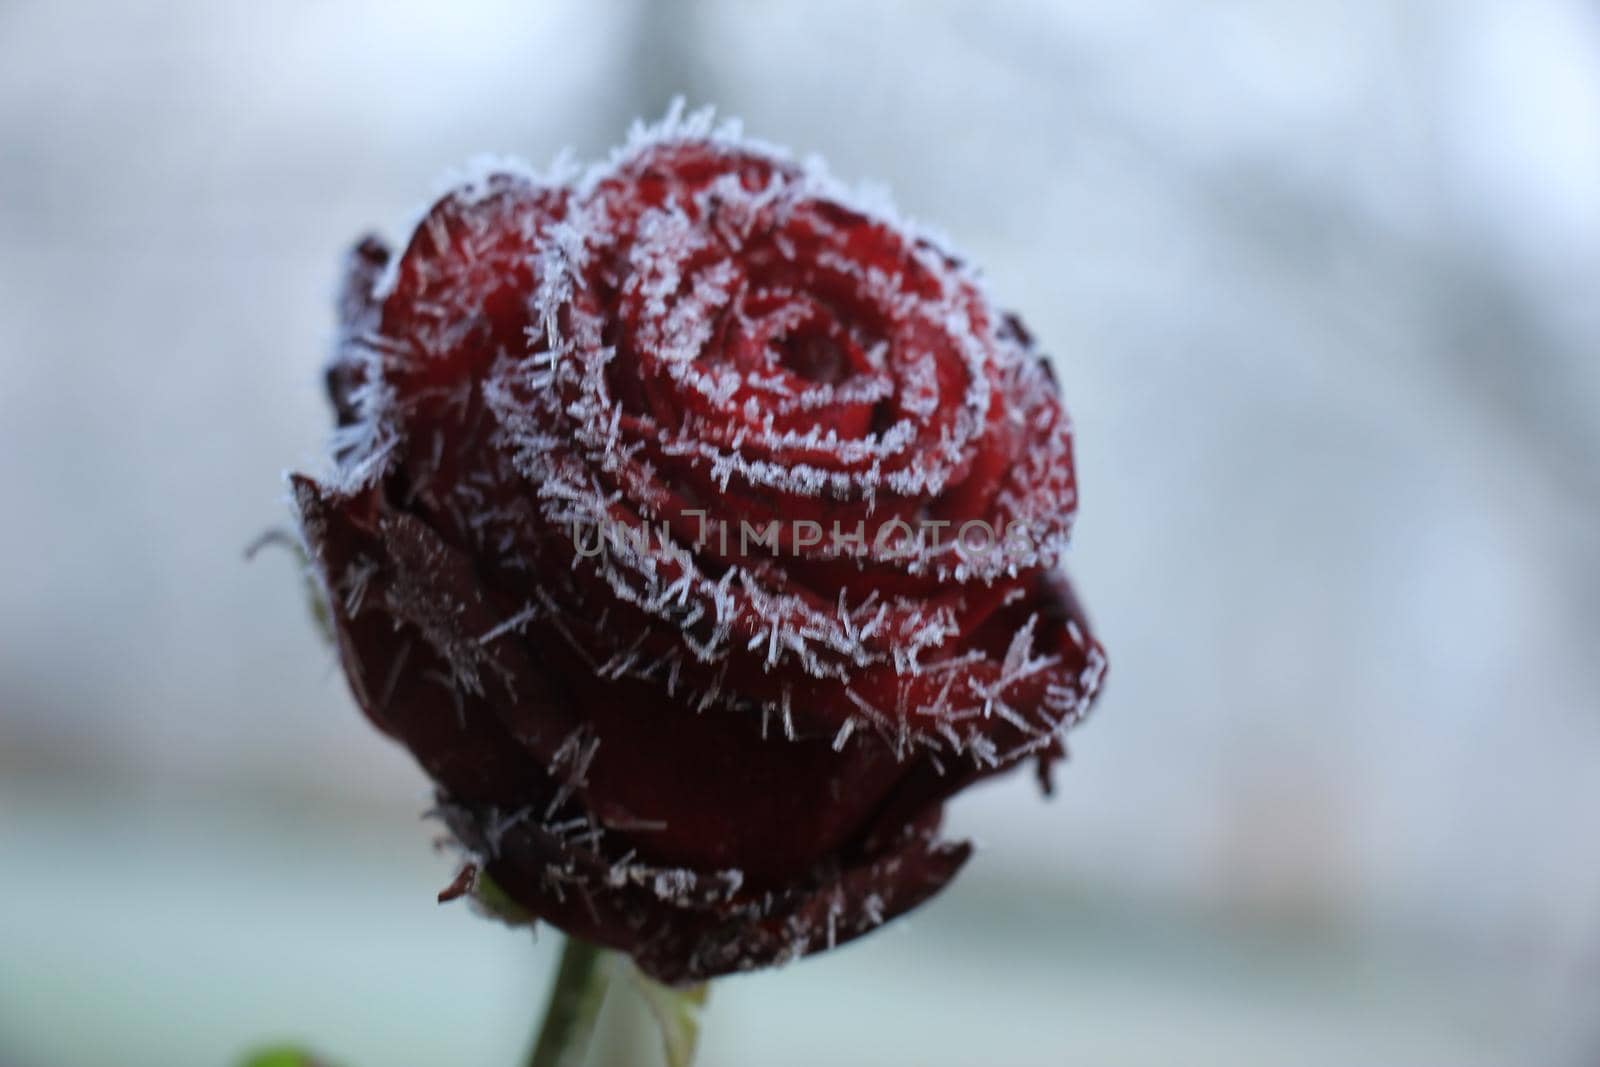 White hoar frost on a single red rose